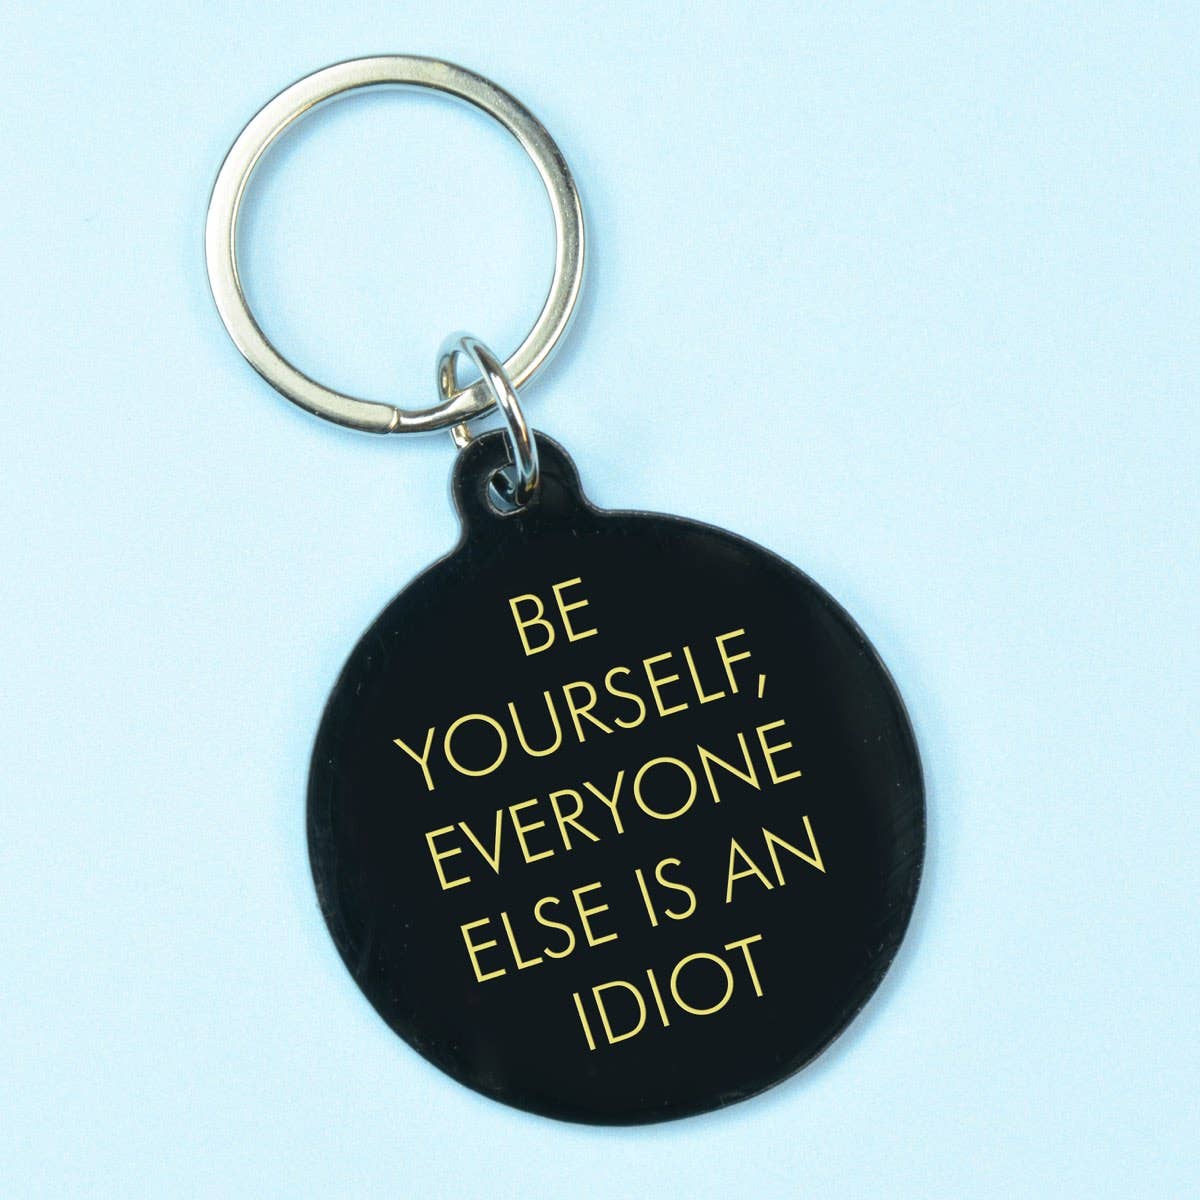 Be Yourself, Everyone Else is an Idiot Keytag